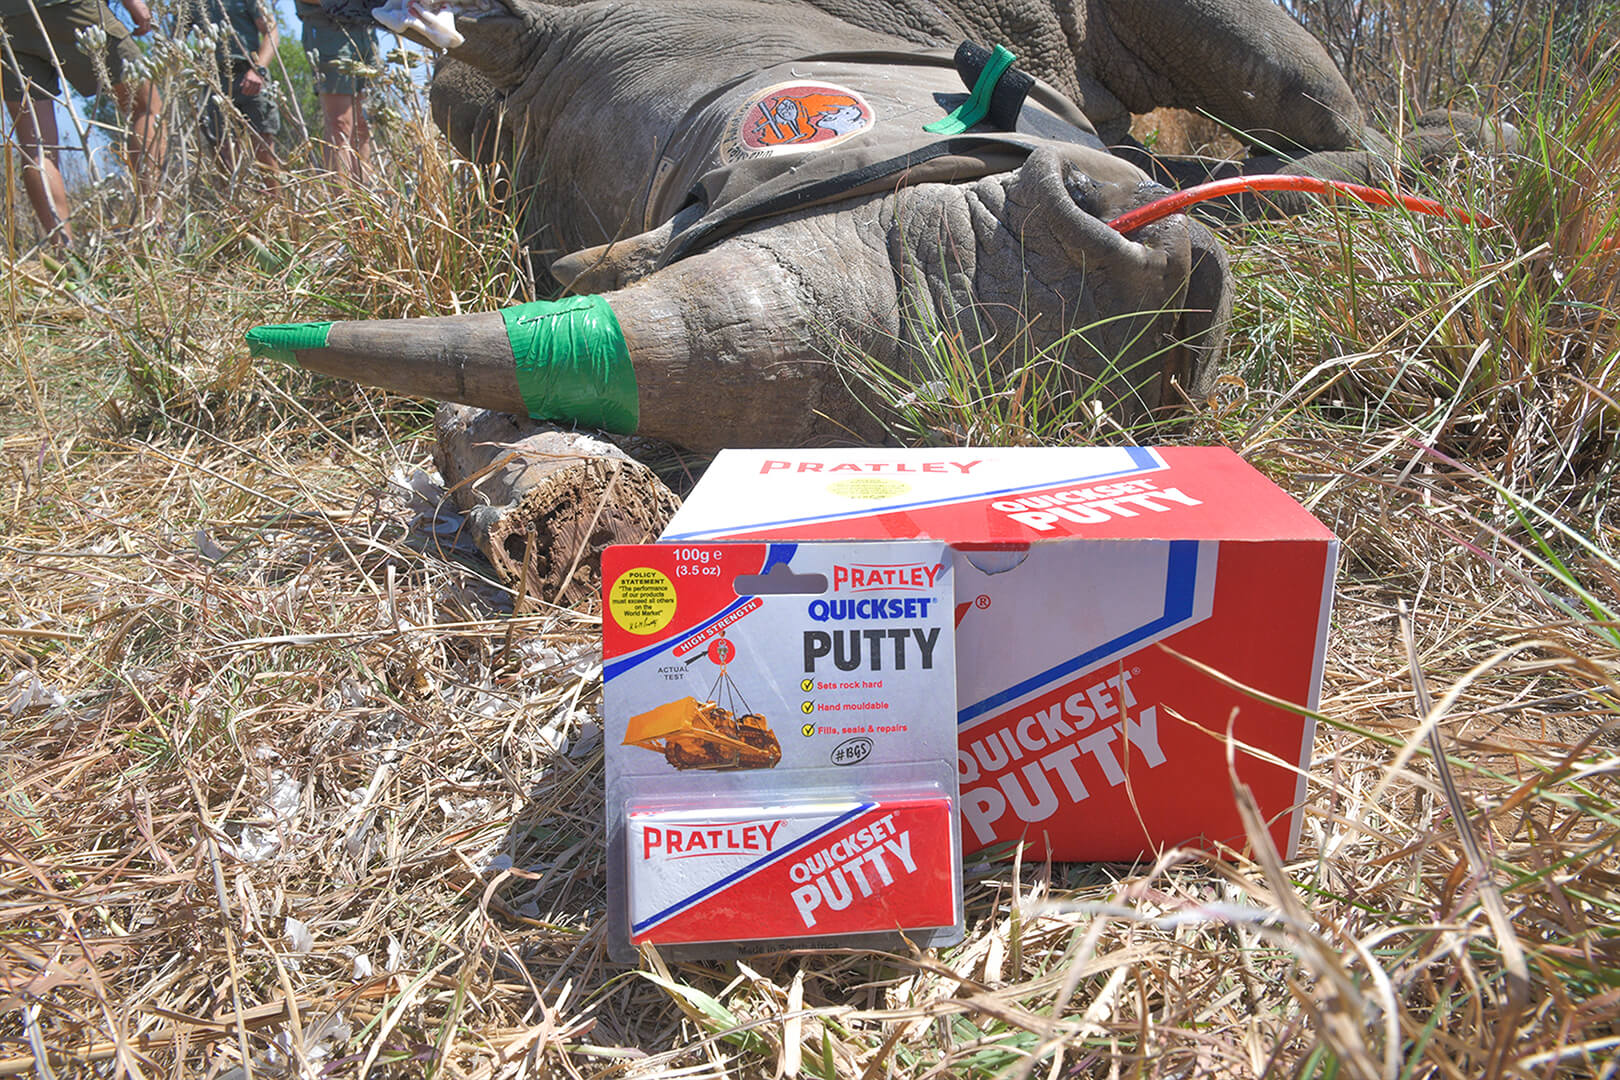 Post_Pratley Putty used in the efforts to protect rhinos